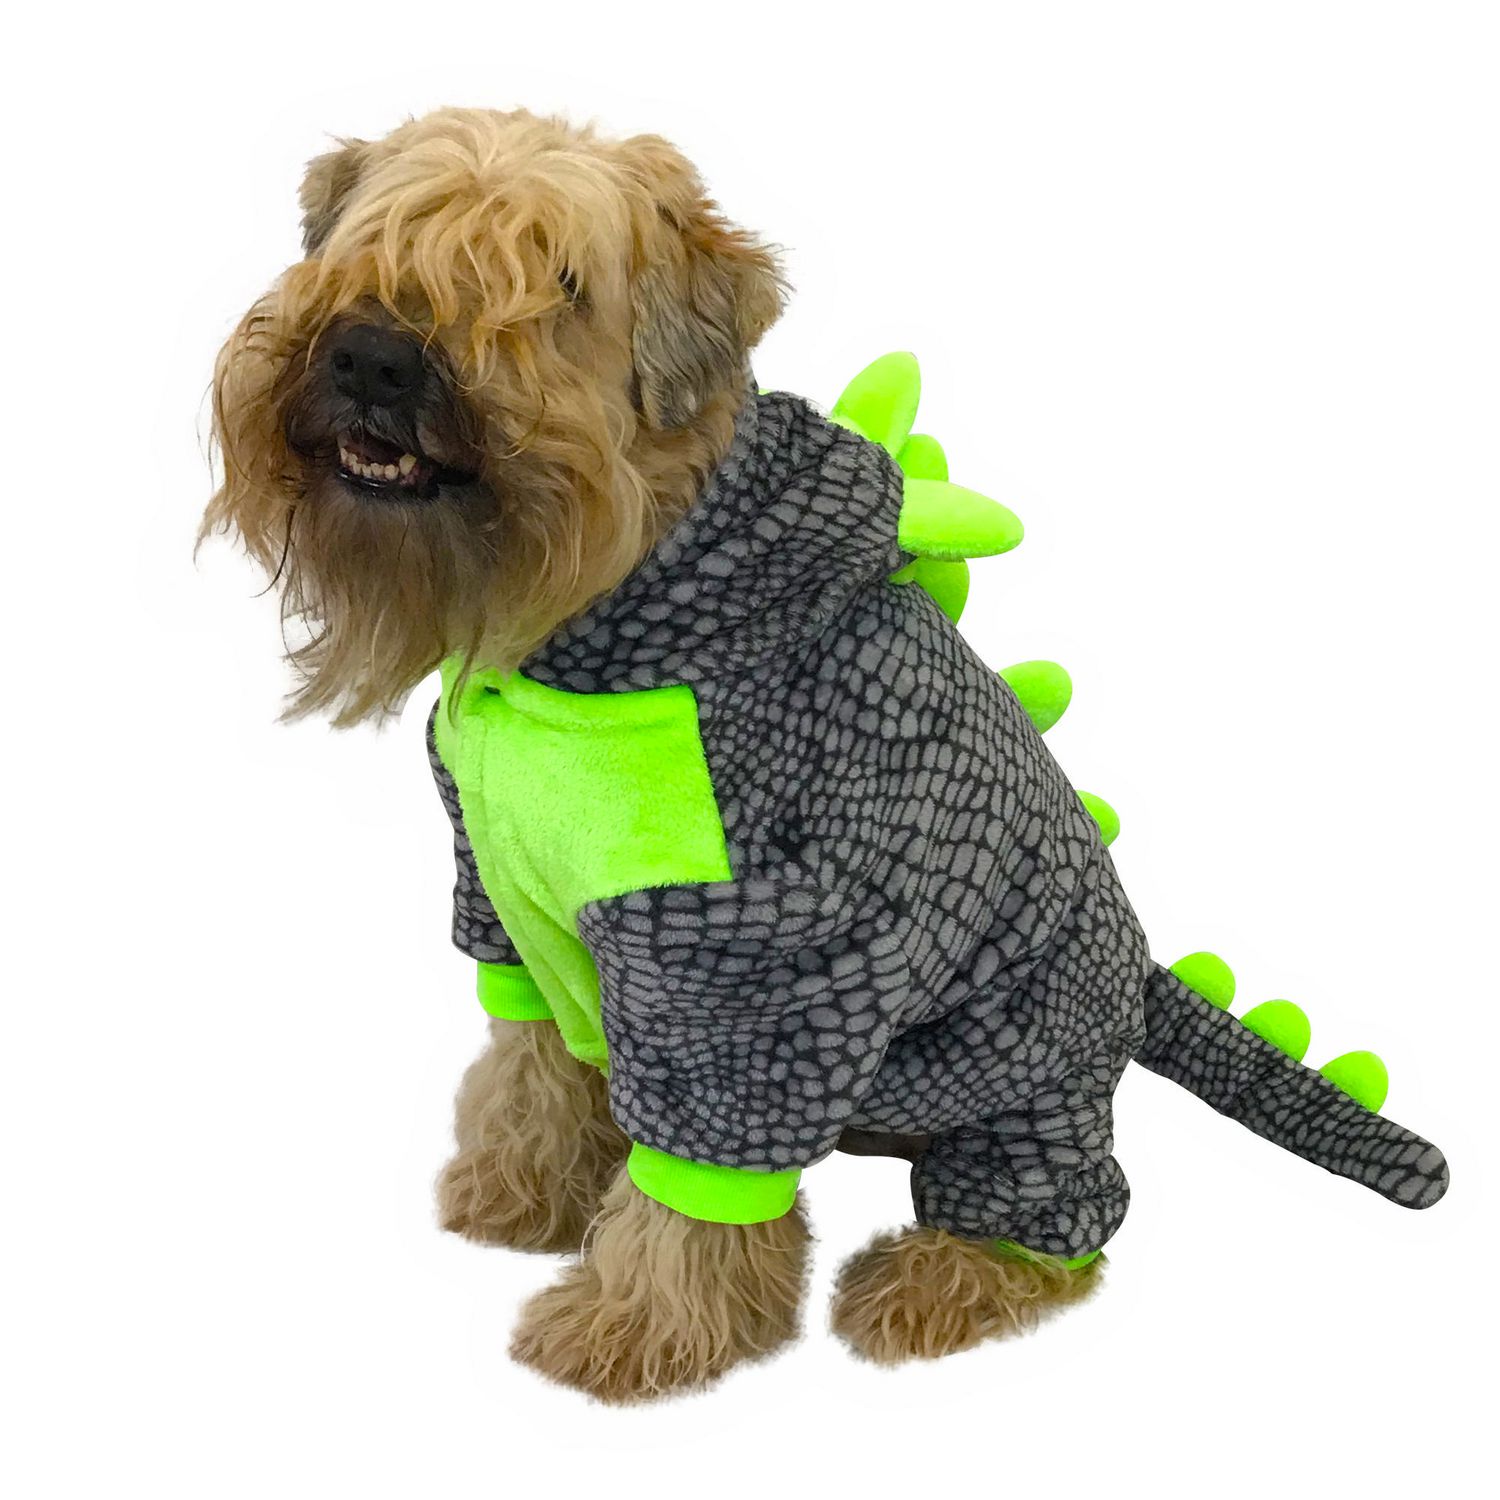 George Hooded Dinosaur Costume for Dogs | Walmart Canada